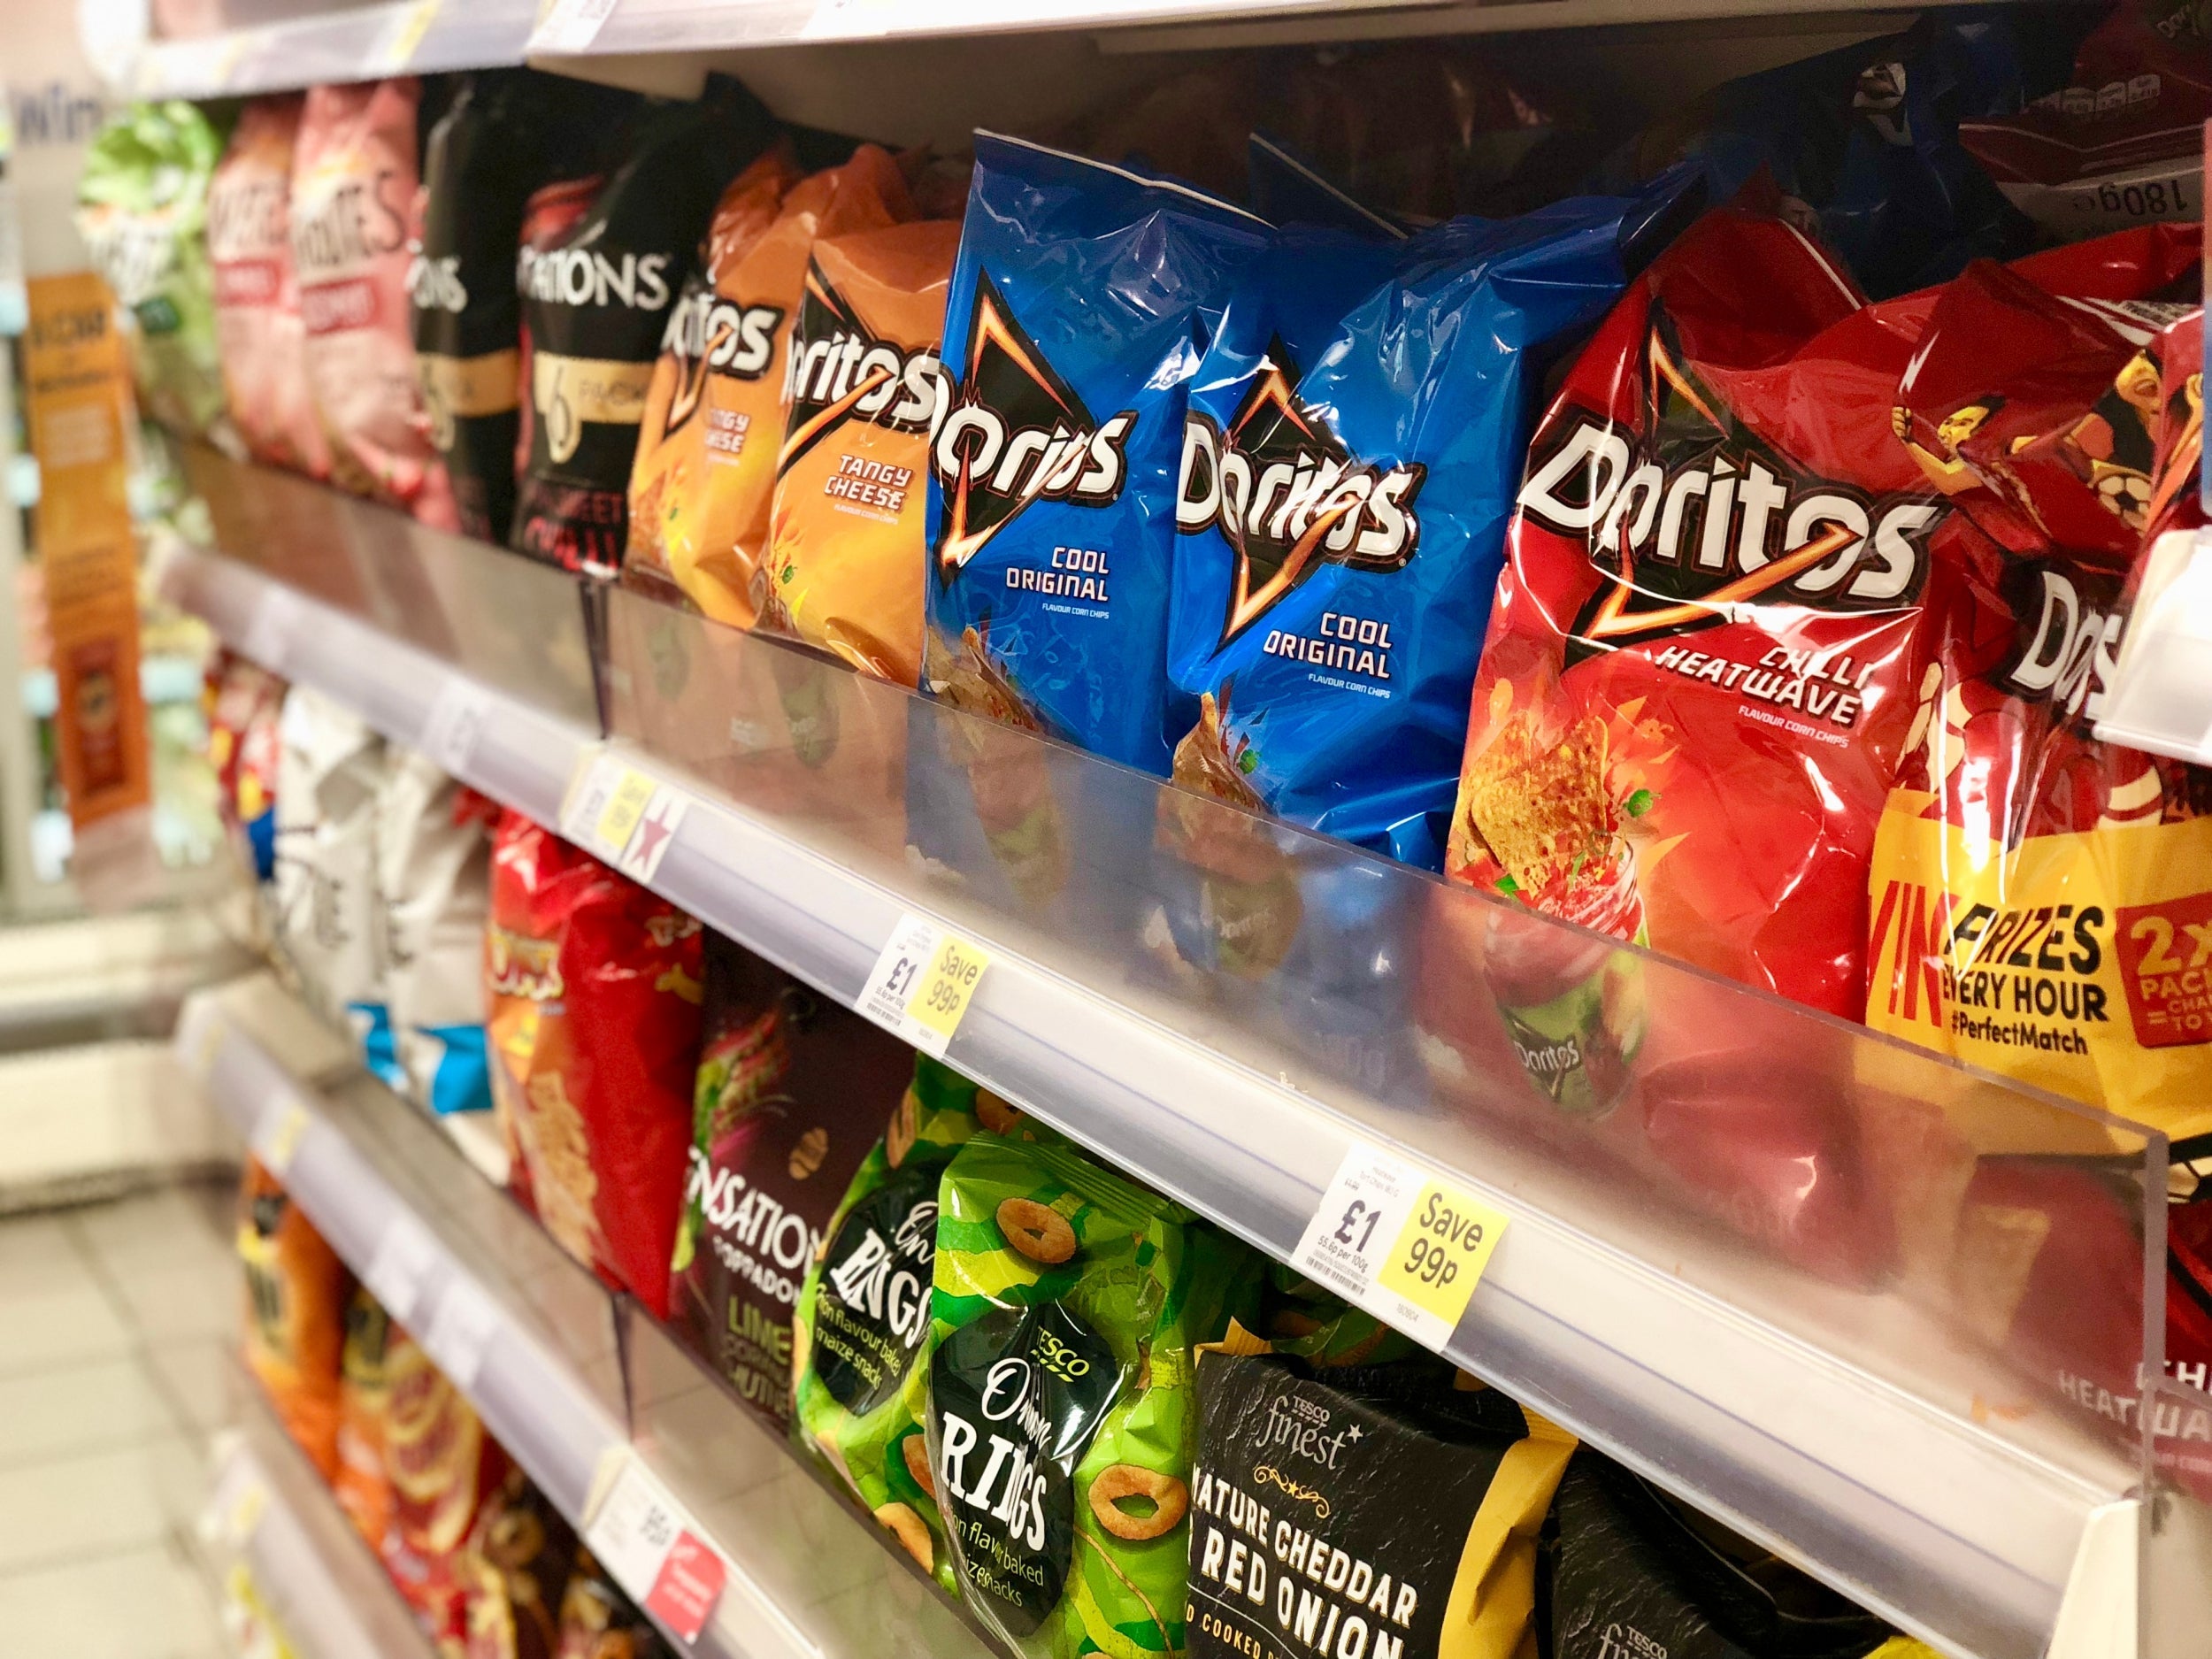 Should supermarkets take responsibility for the way they present junk food?